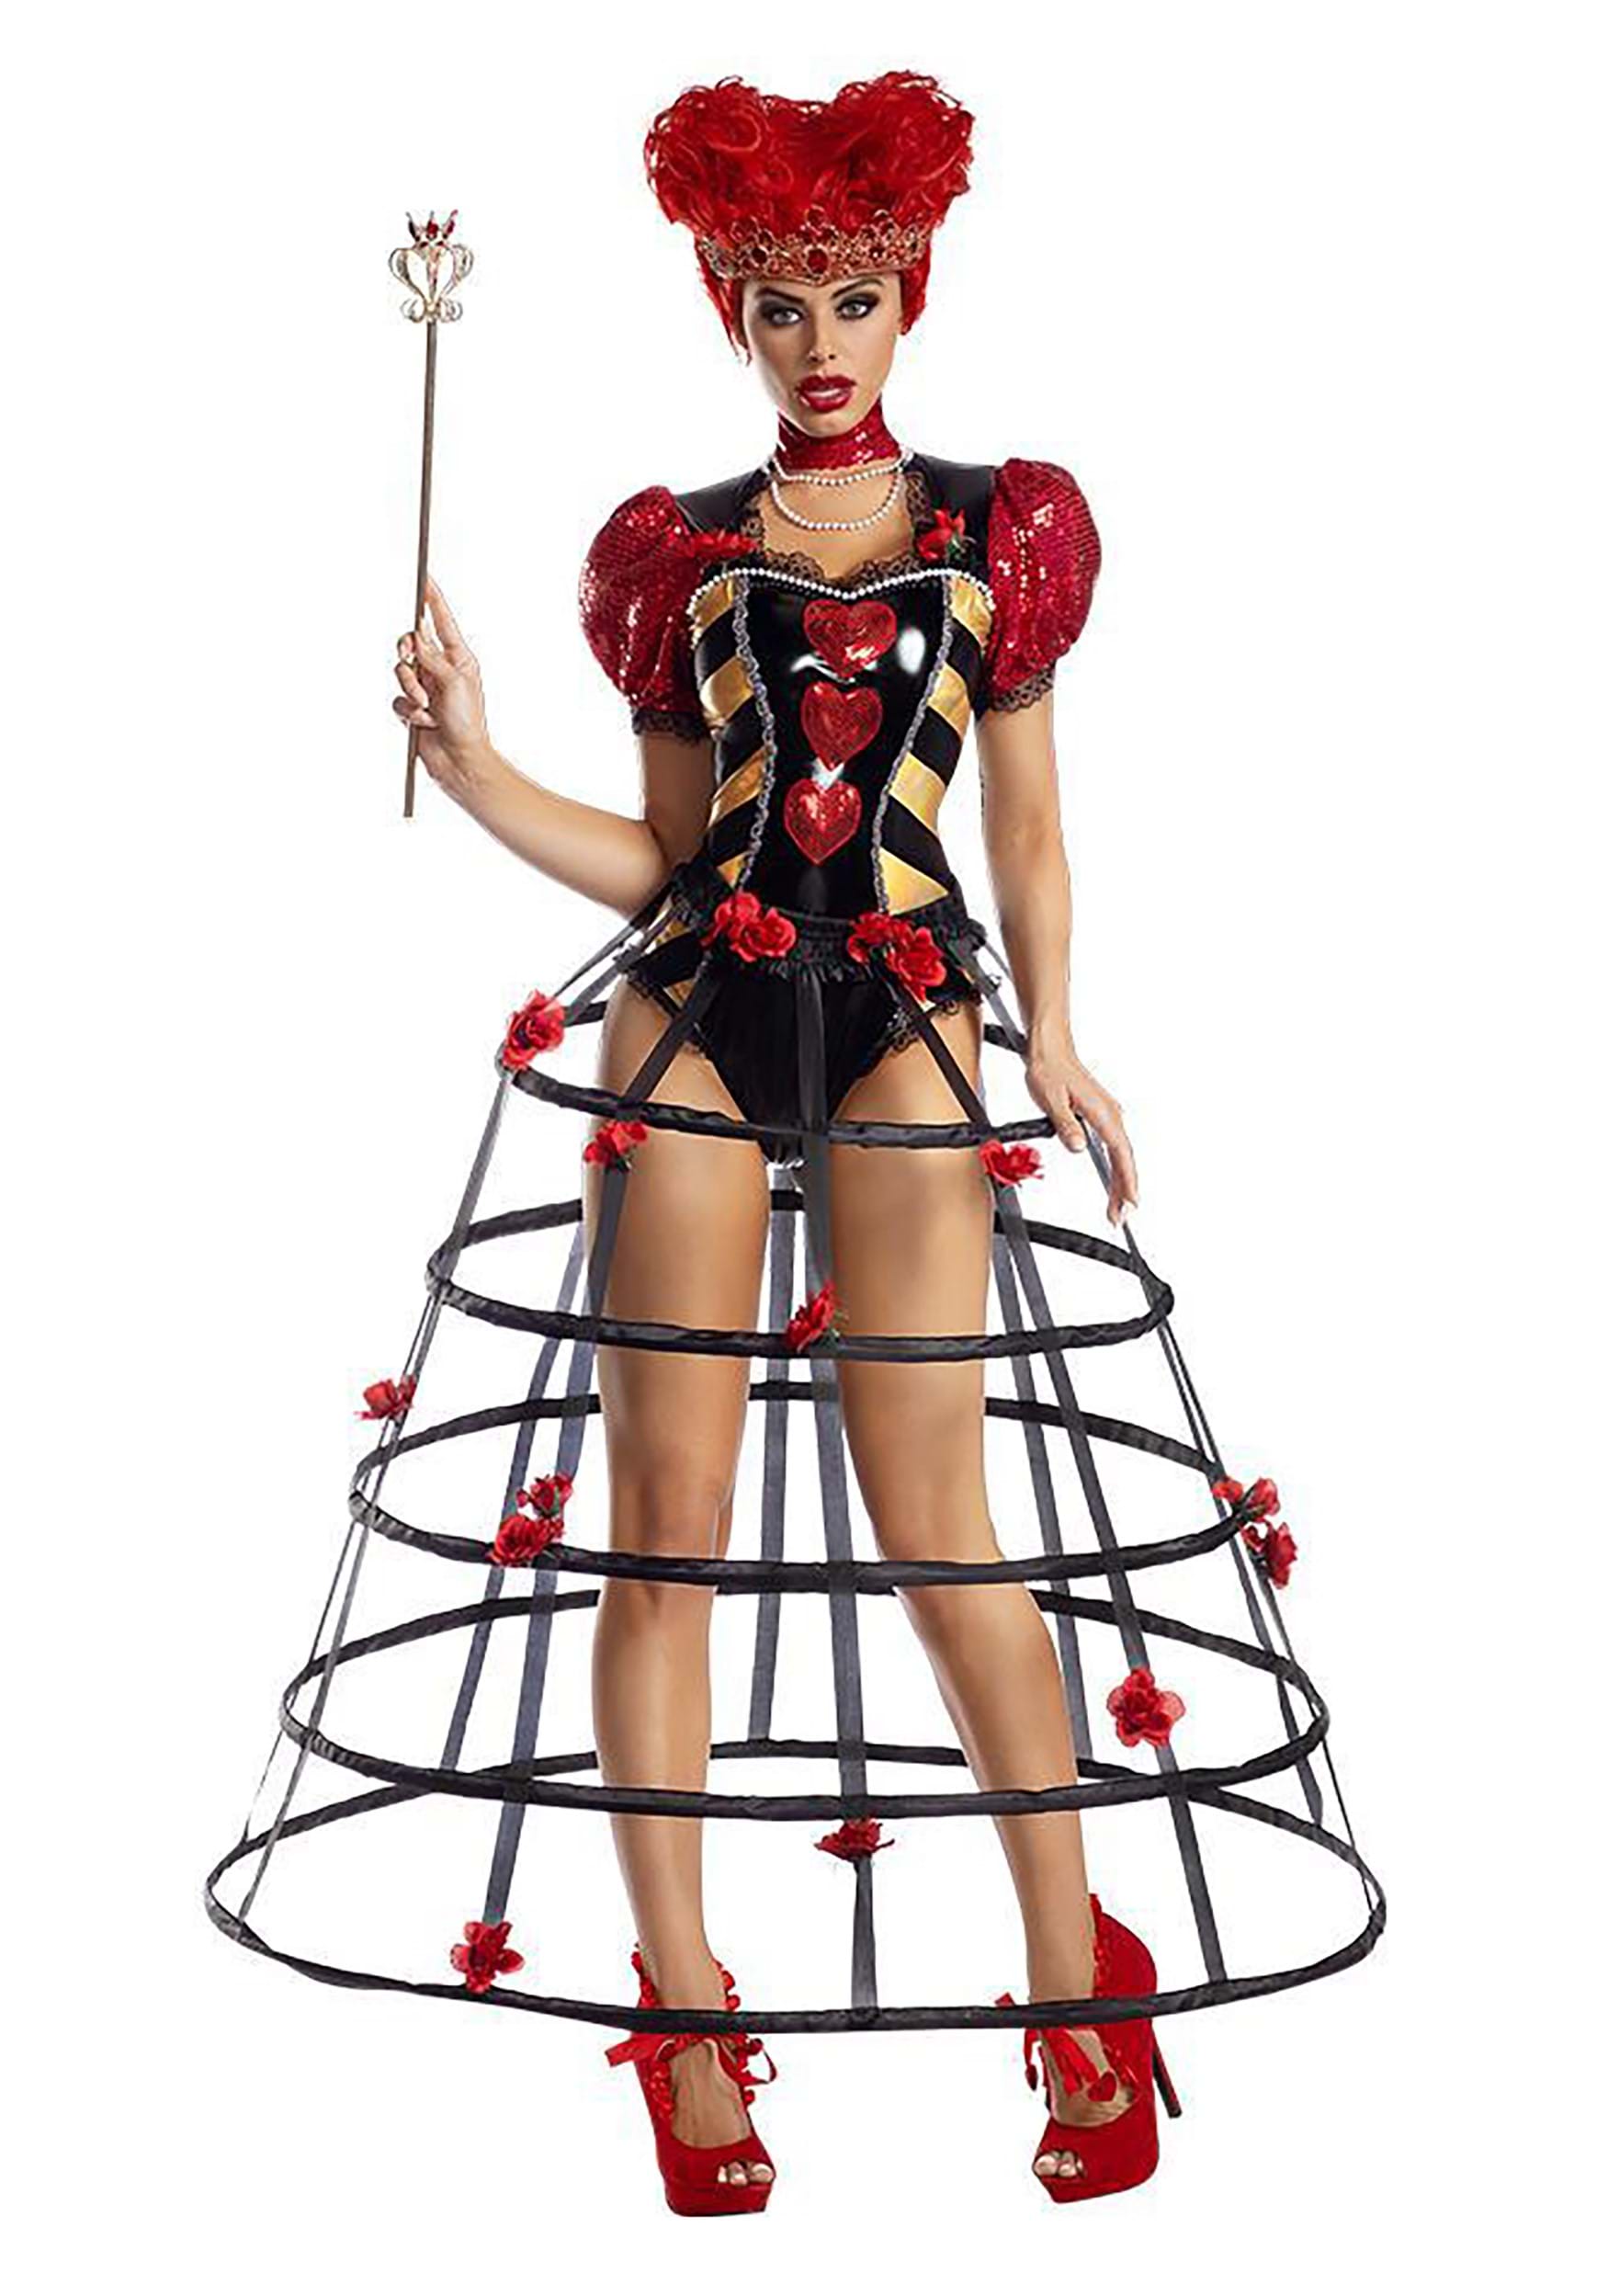 Image of Caged Heart Queen Costume ID PKPK2150-L